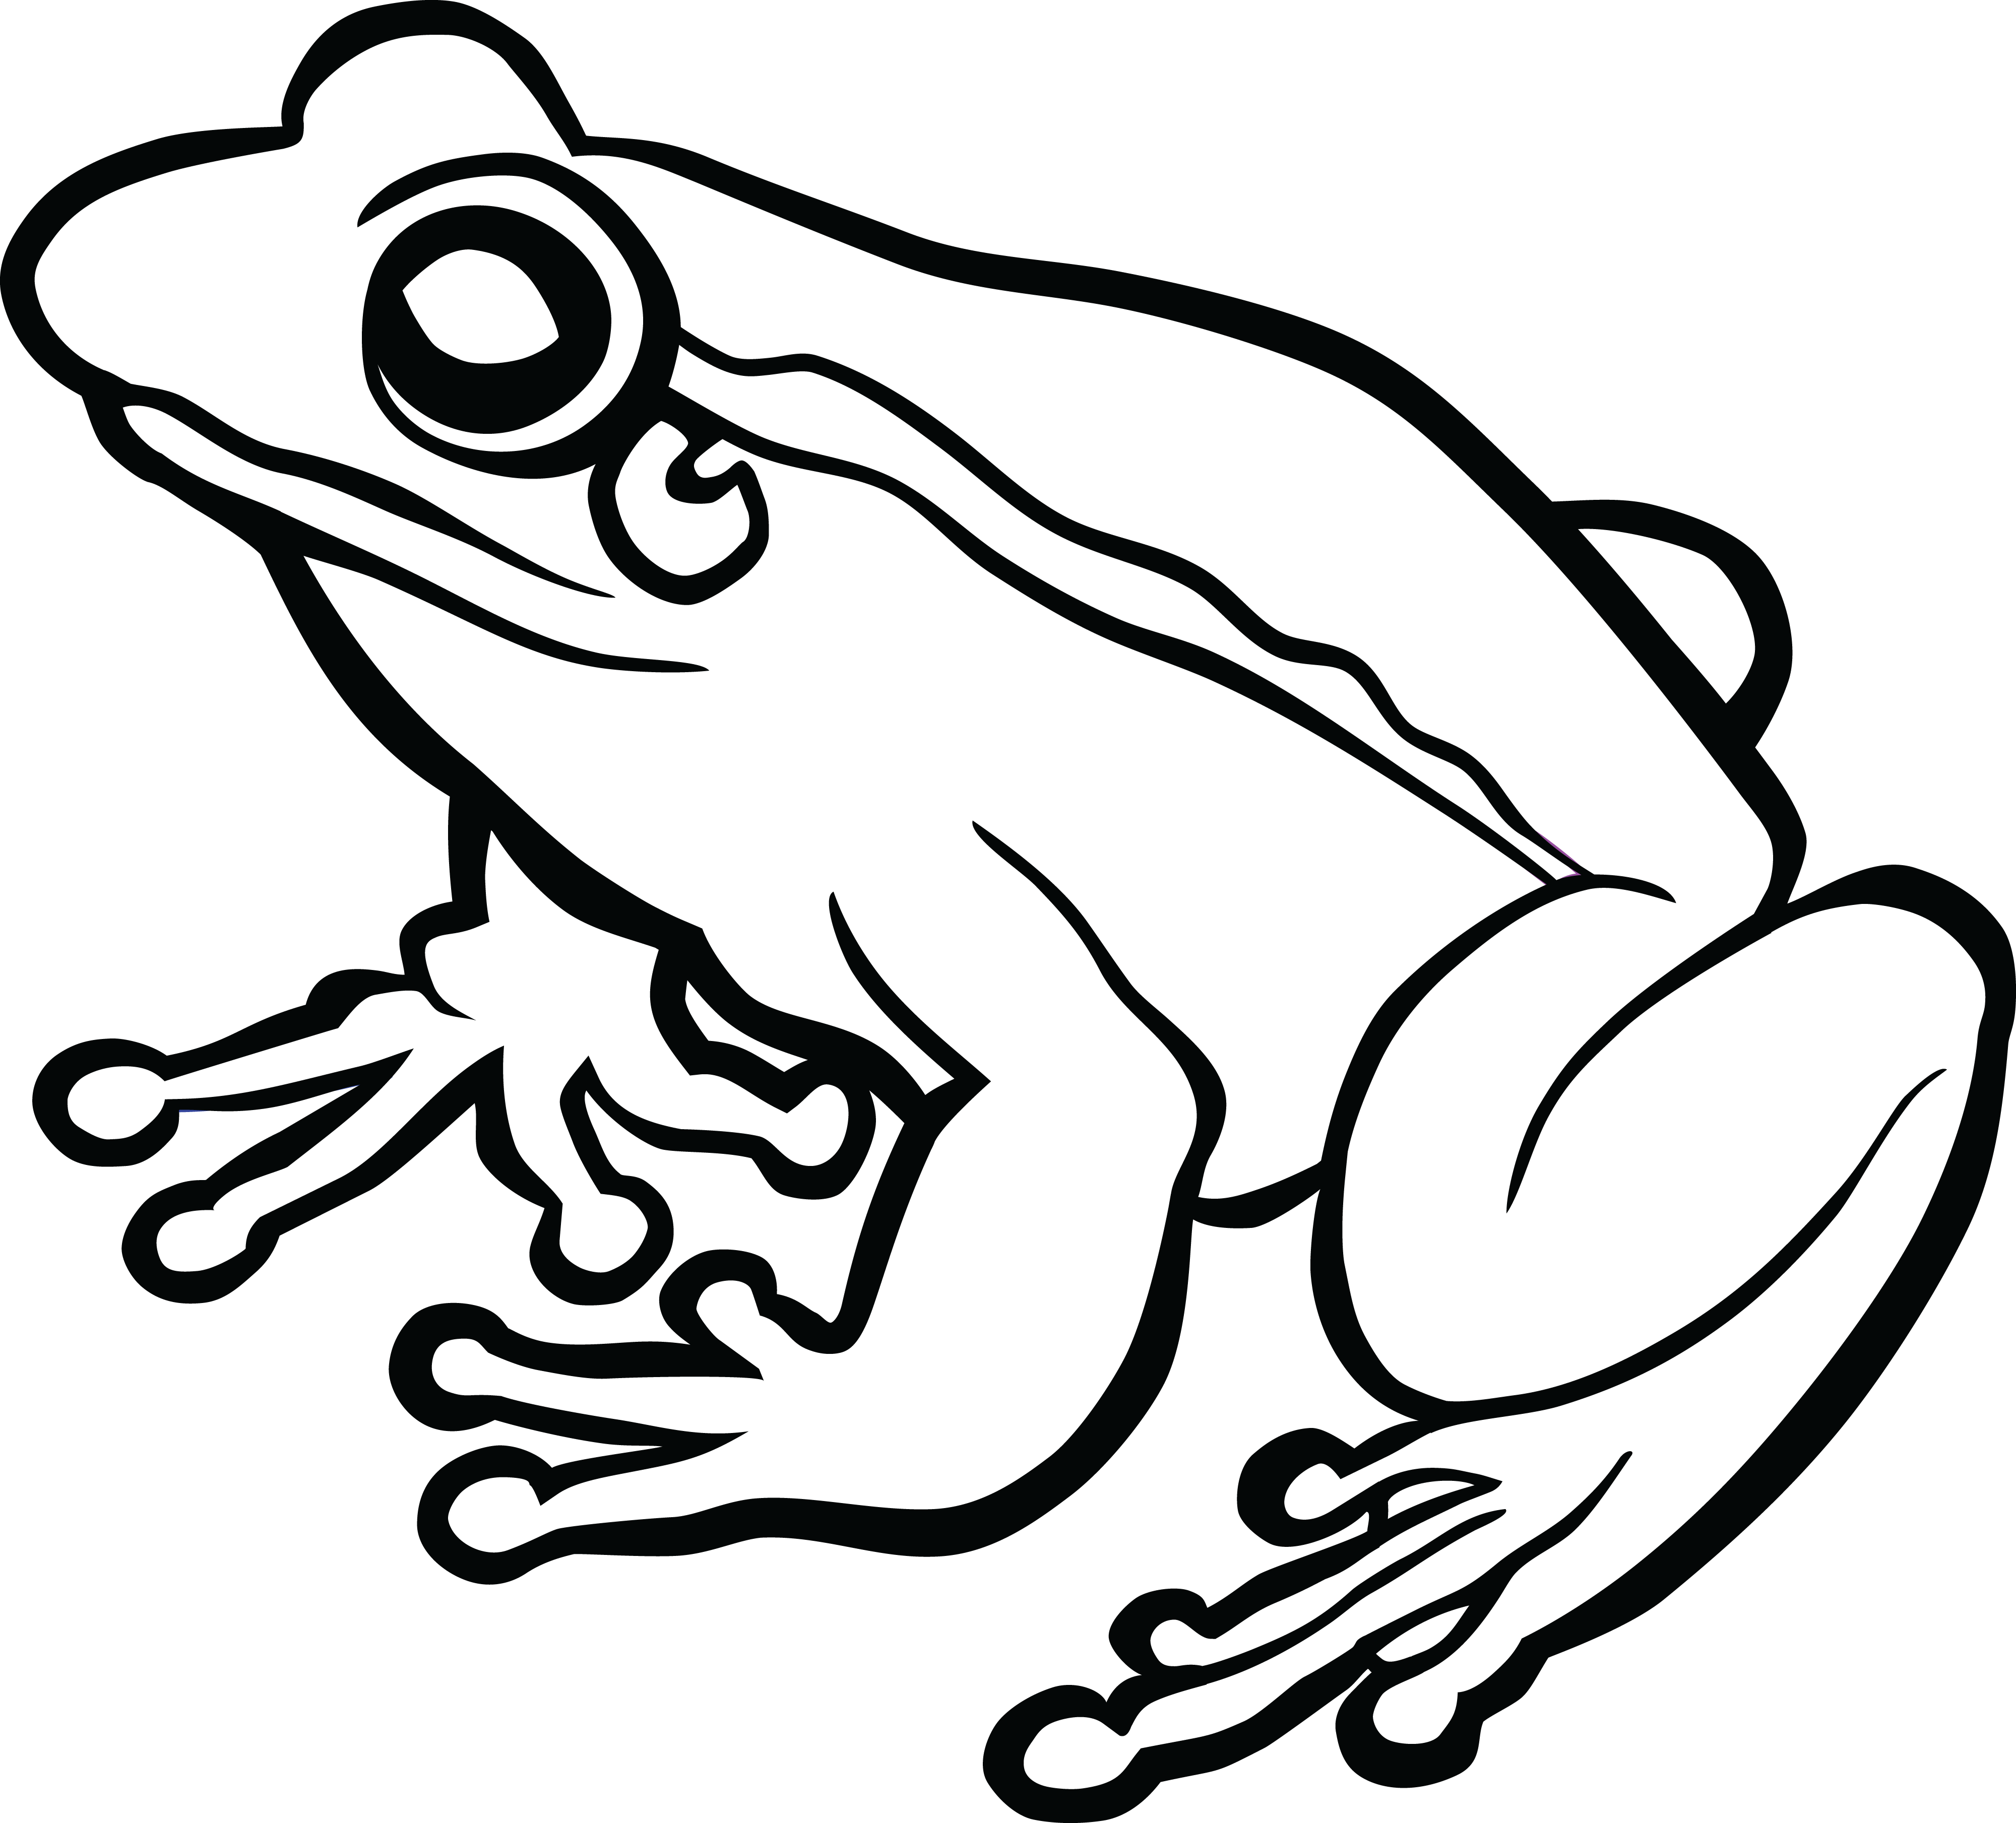 Toad PNG Black And White - PlusPNG.